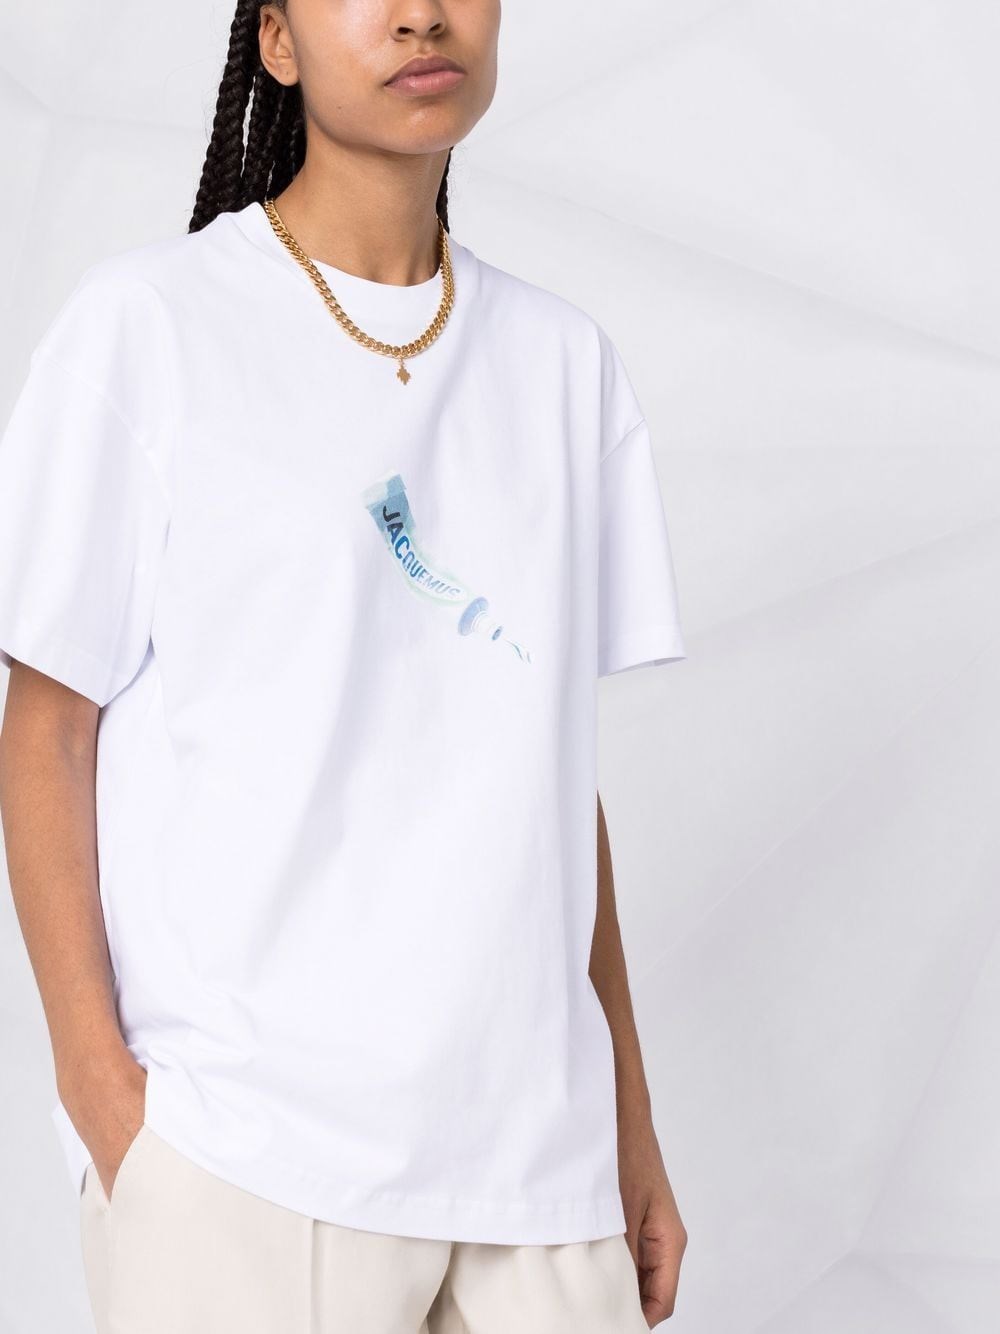 jacquemus TOOTHPASTE T-SHIRT available on montiboutique.com - 46094